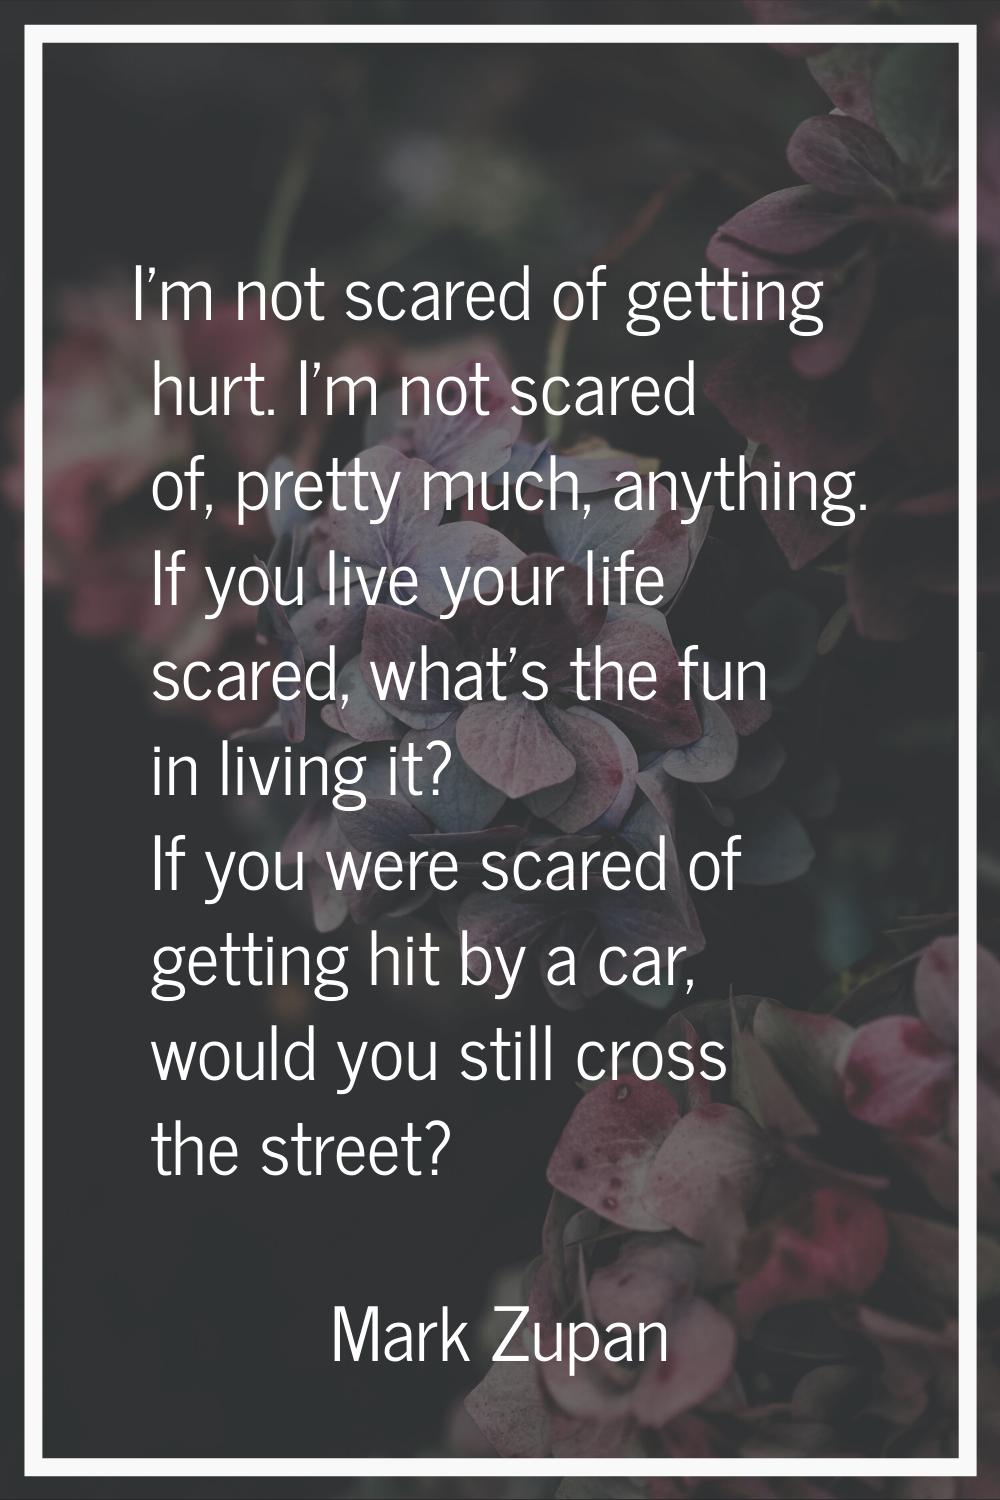 I'm not scared of getting hurt. I'm not scared of, pretty much, anything. If you live your life sca